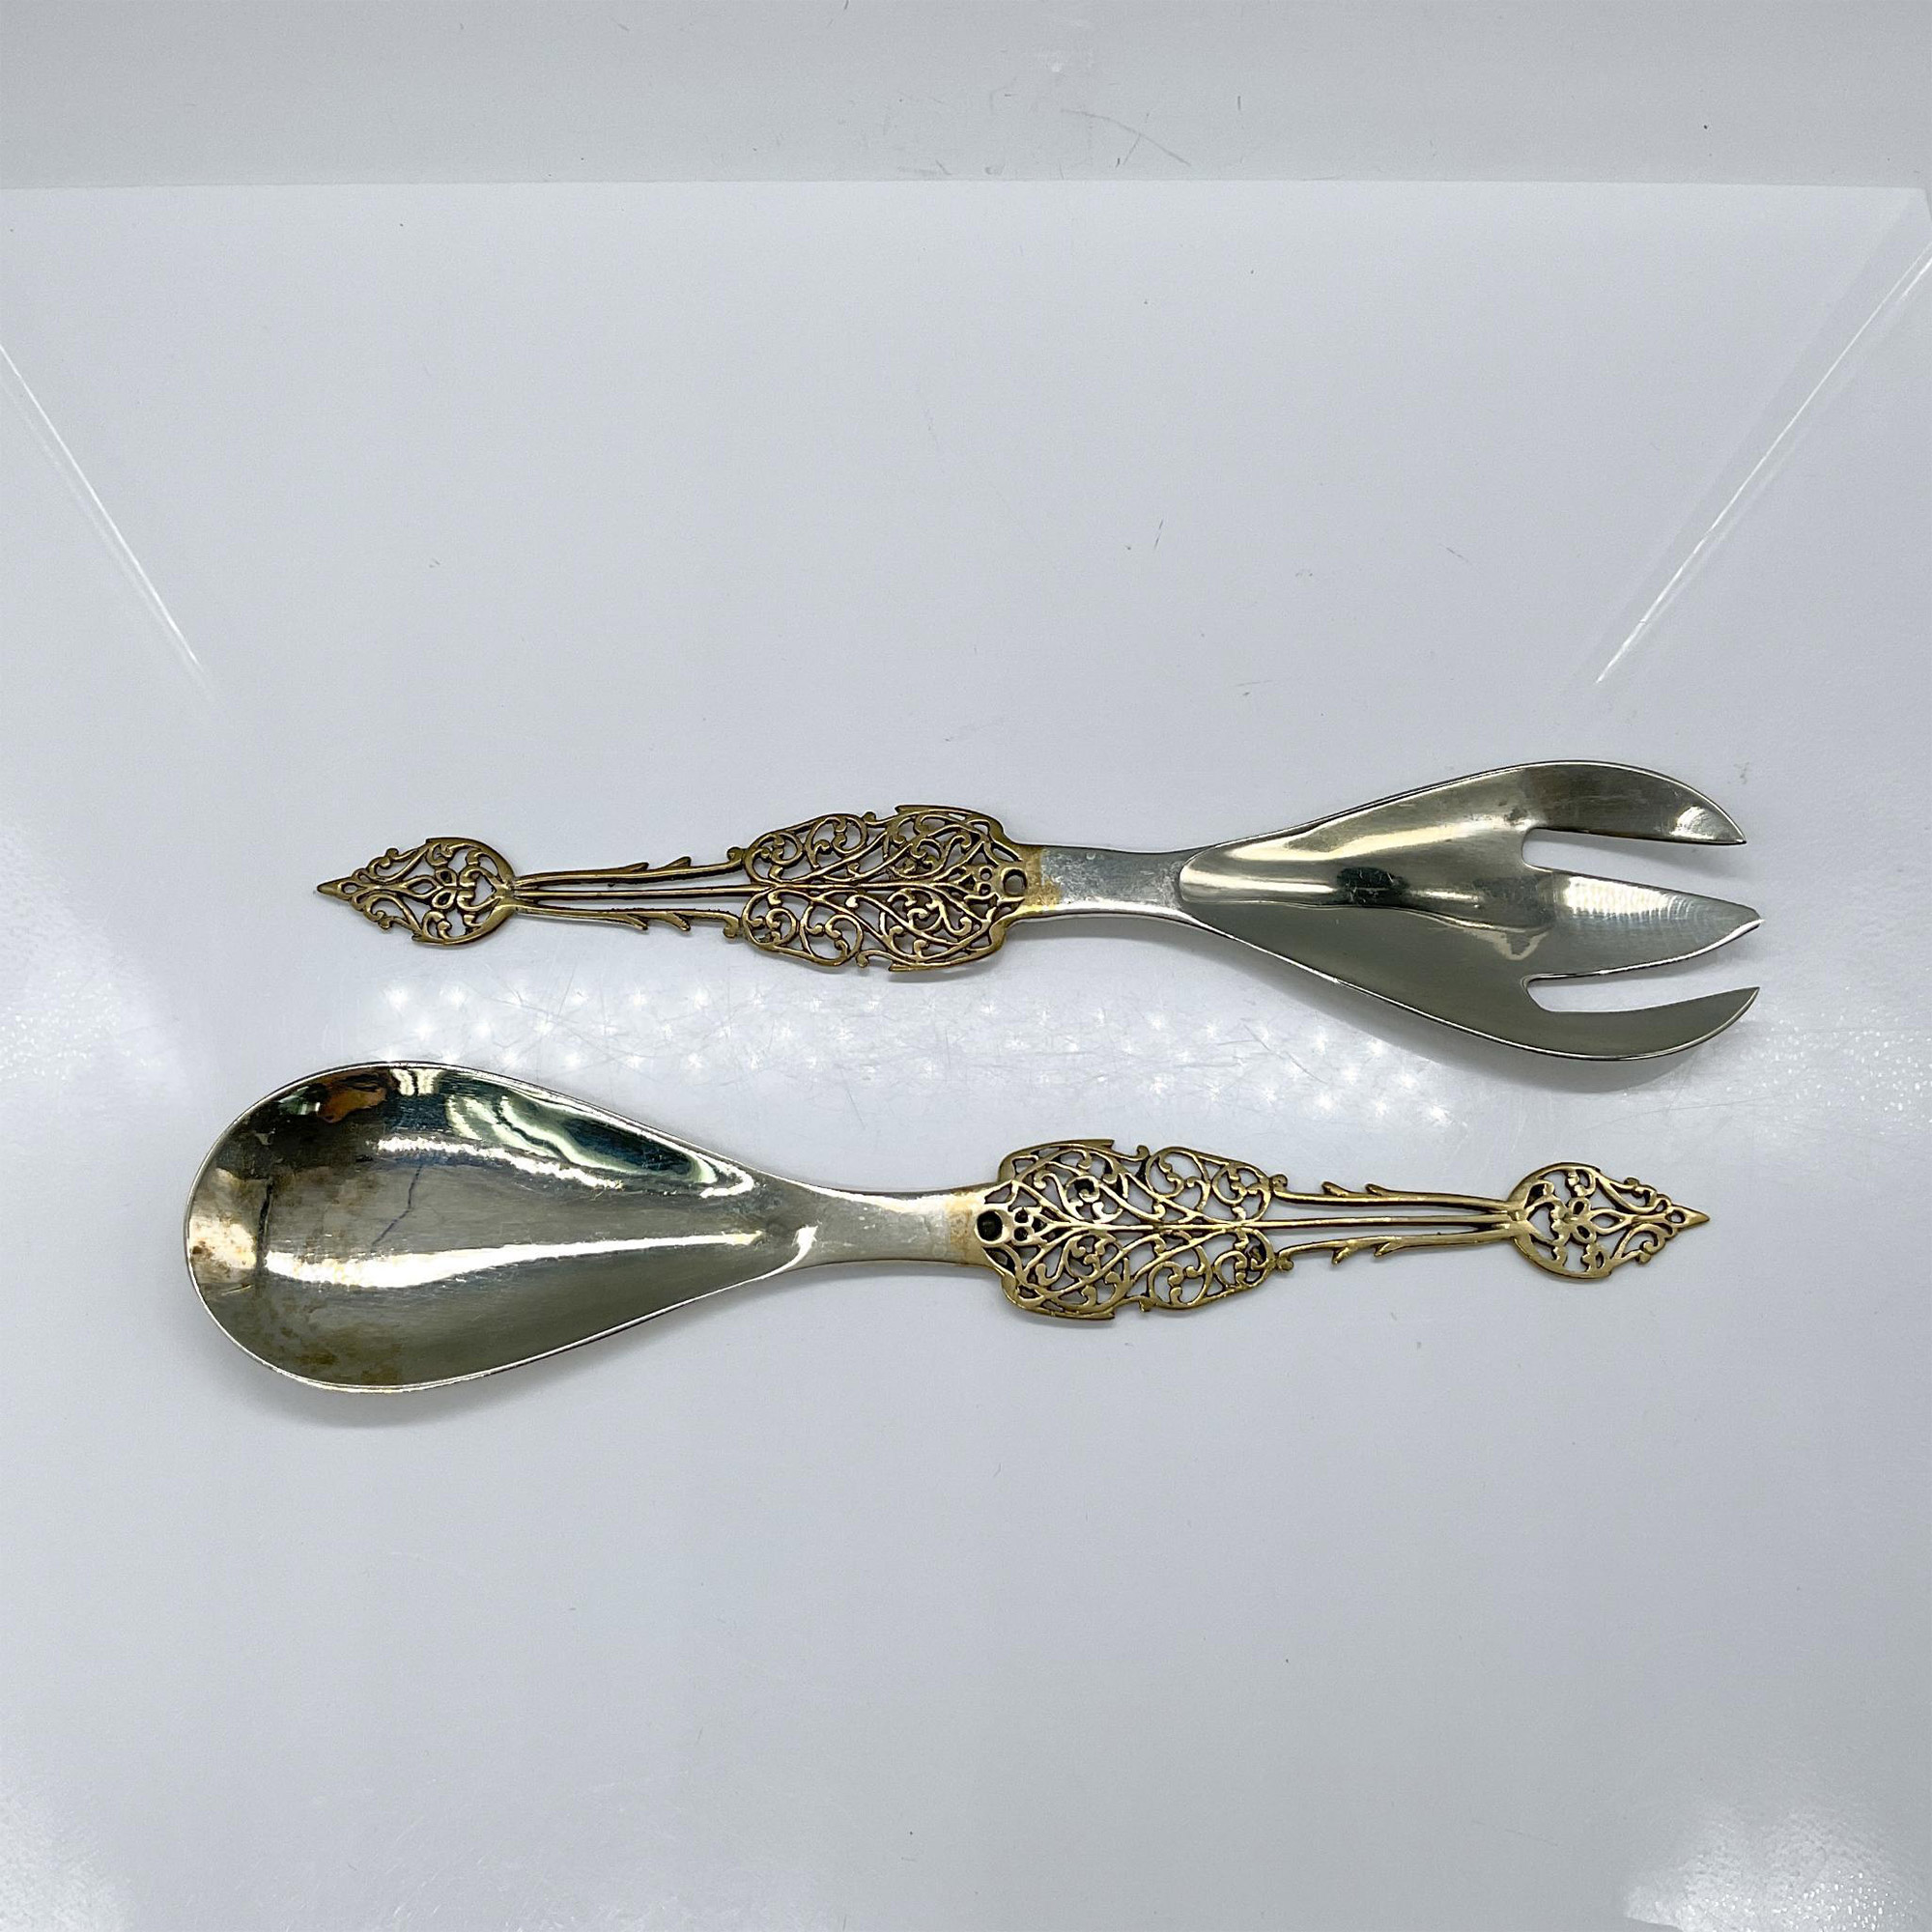 2pc Brass Plated Serving Salad Fork and Spoon - Image 2 of 3